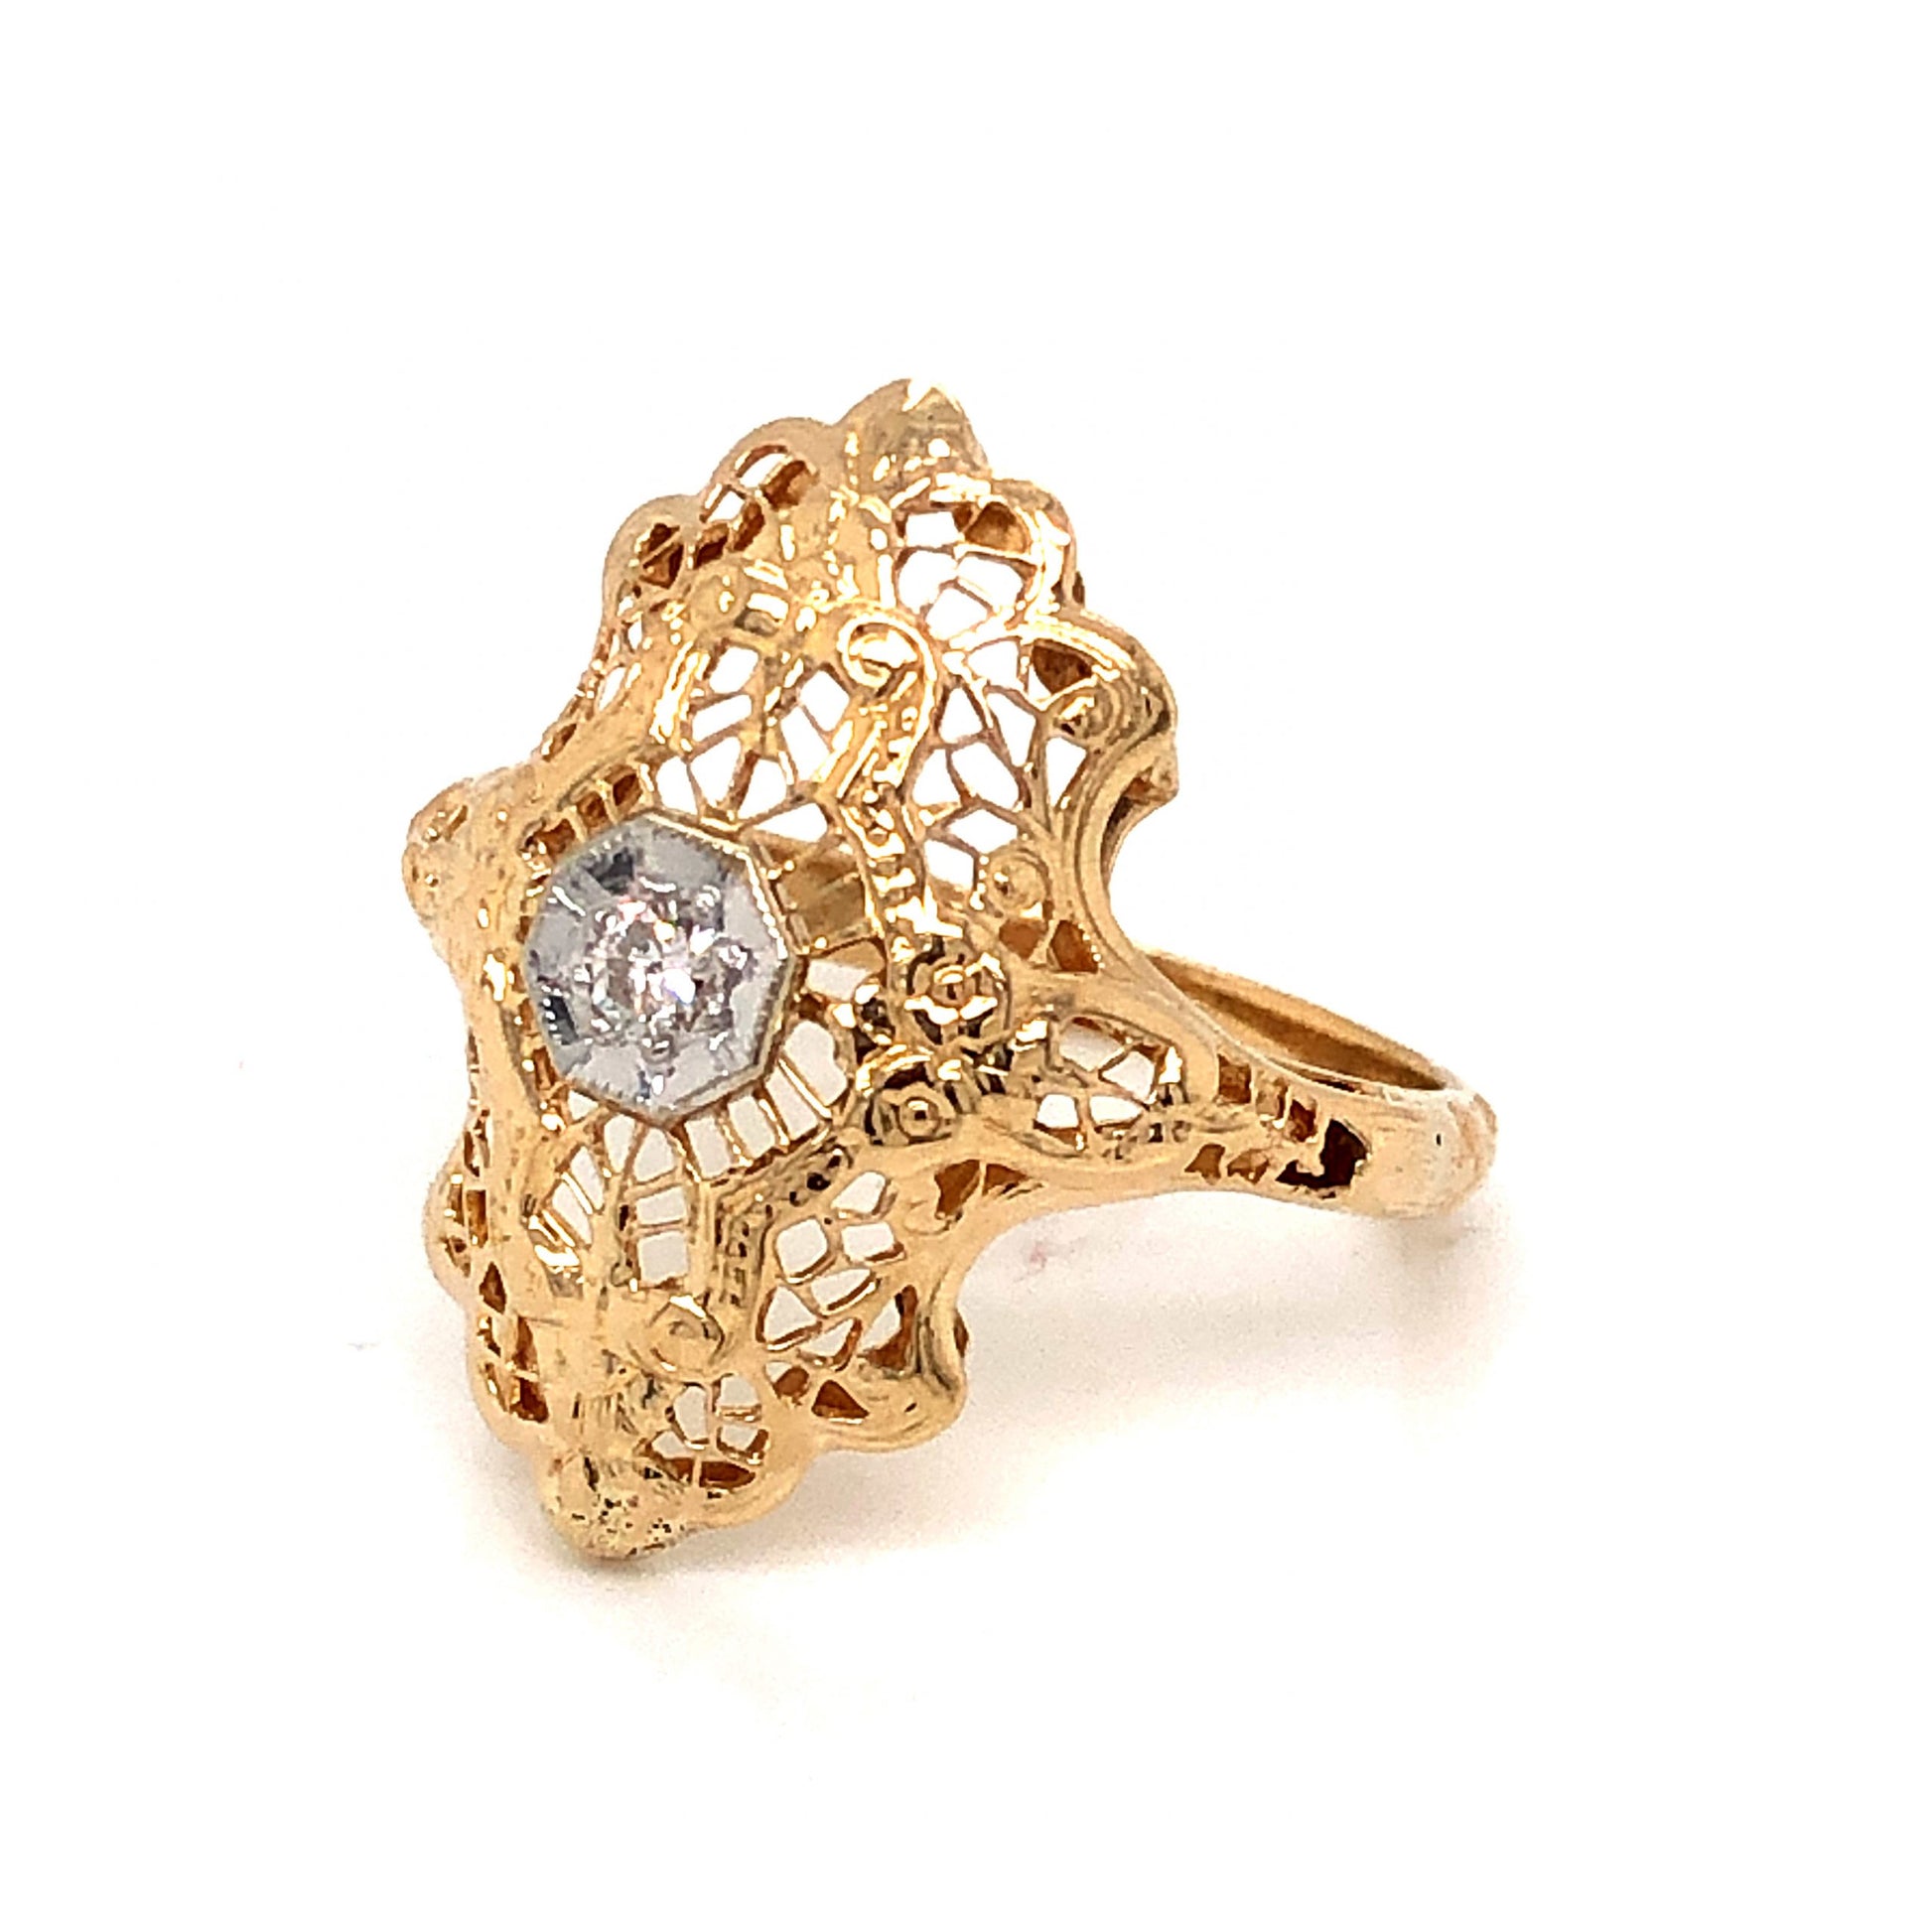 Filigree Diamond Cocktail Ring in 14k Yellow and White GoldComposition: Platinum Ring Size: 5.5 Total Diamond Weight: .10ct Total Gram Weight: 2.4 g Inscription: 14k
      